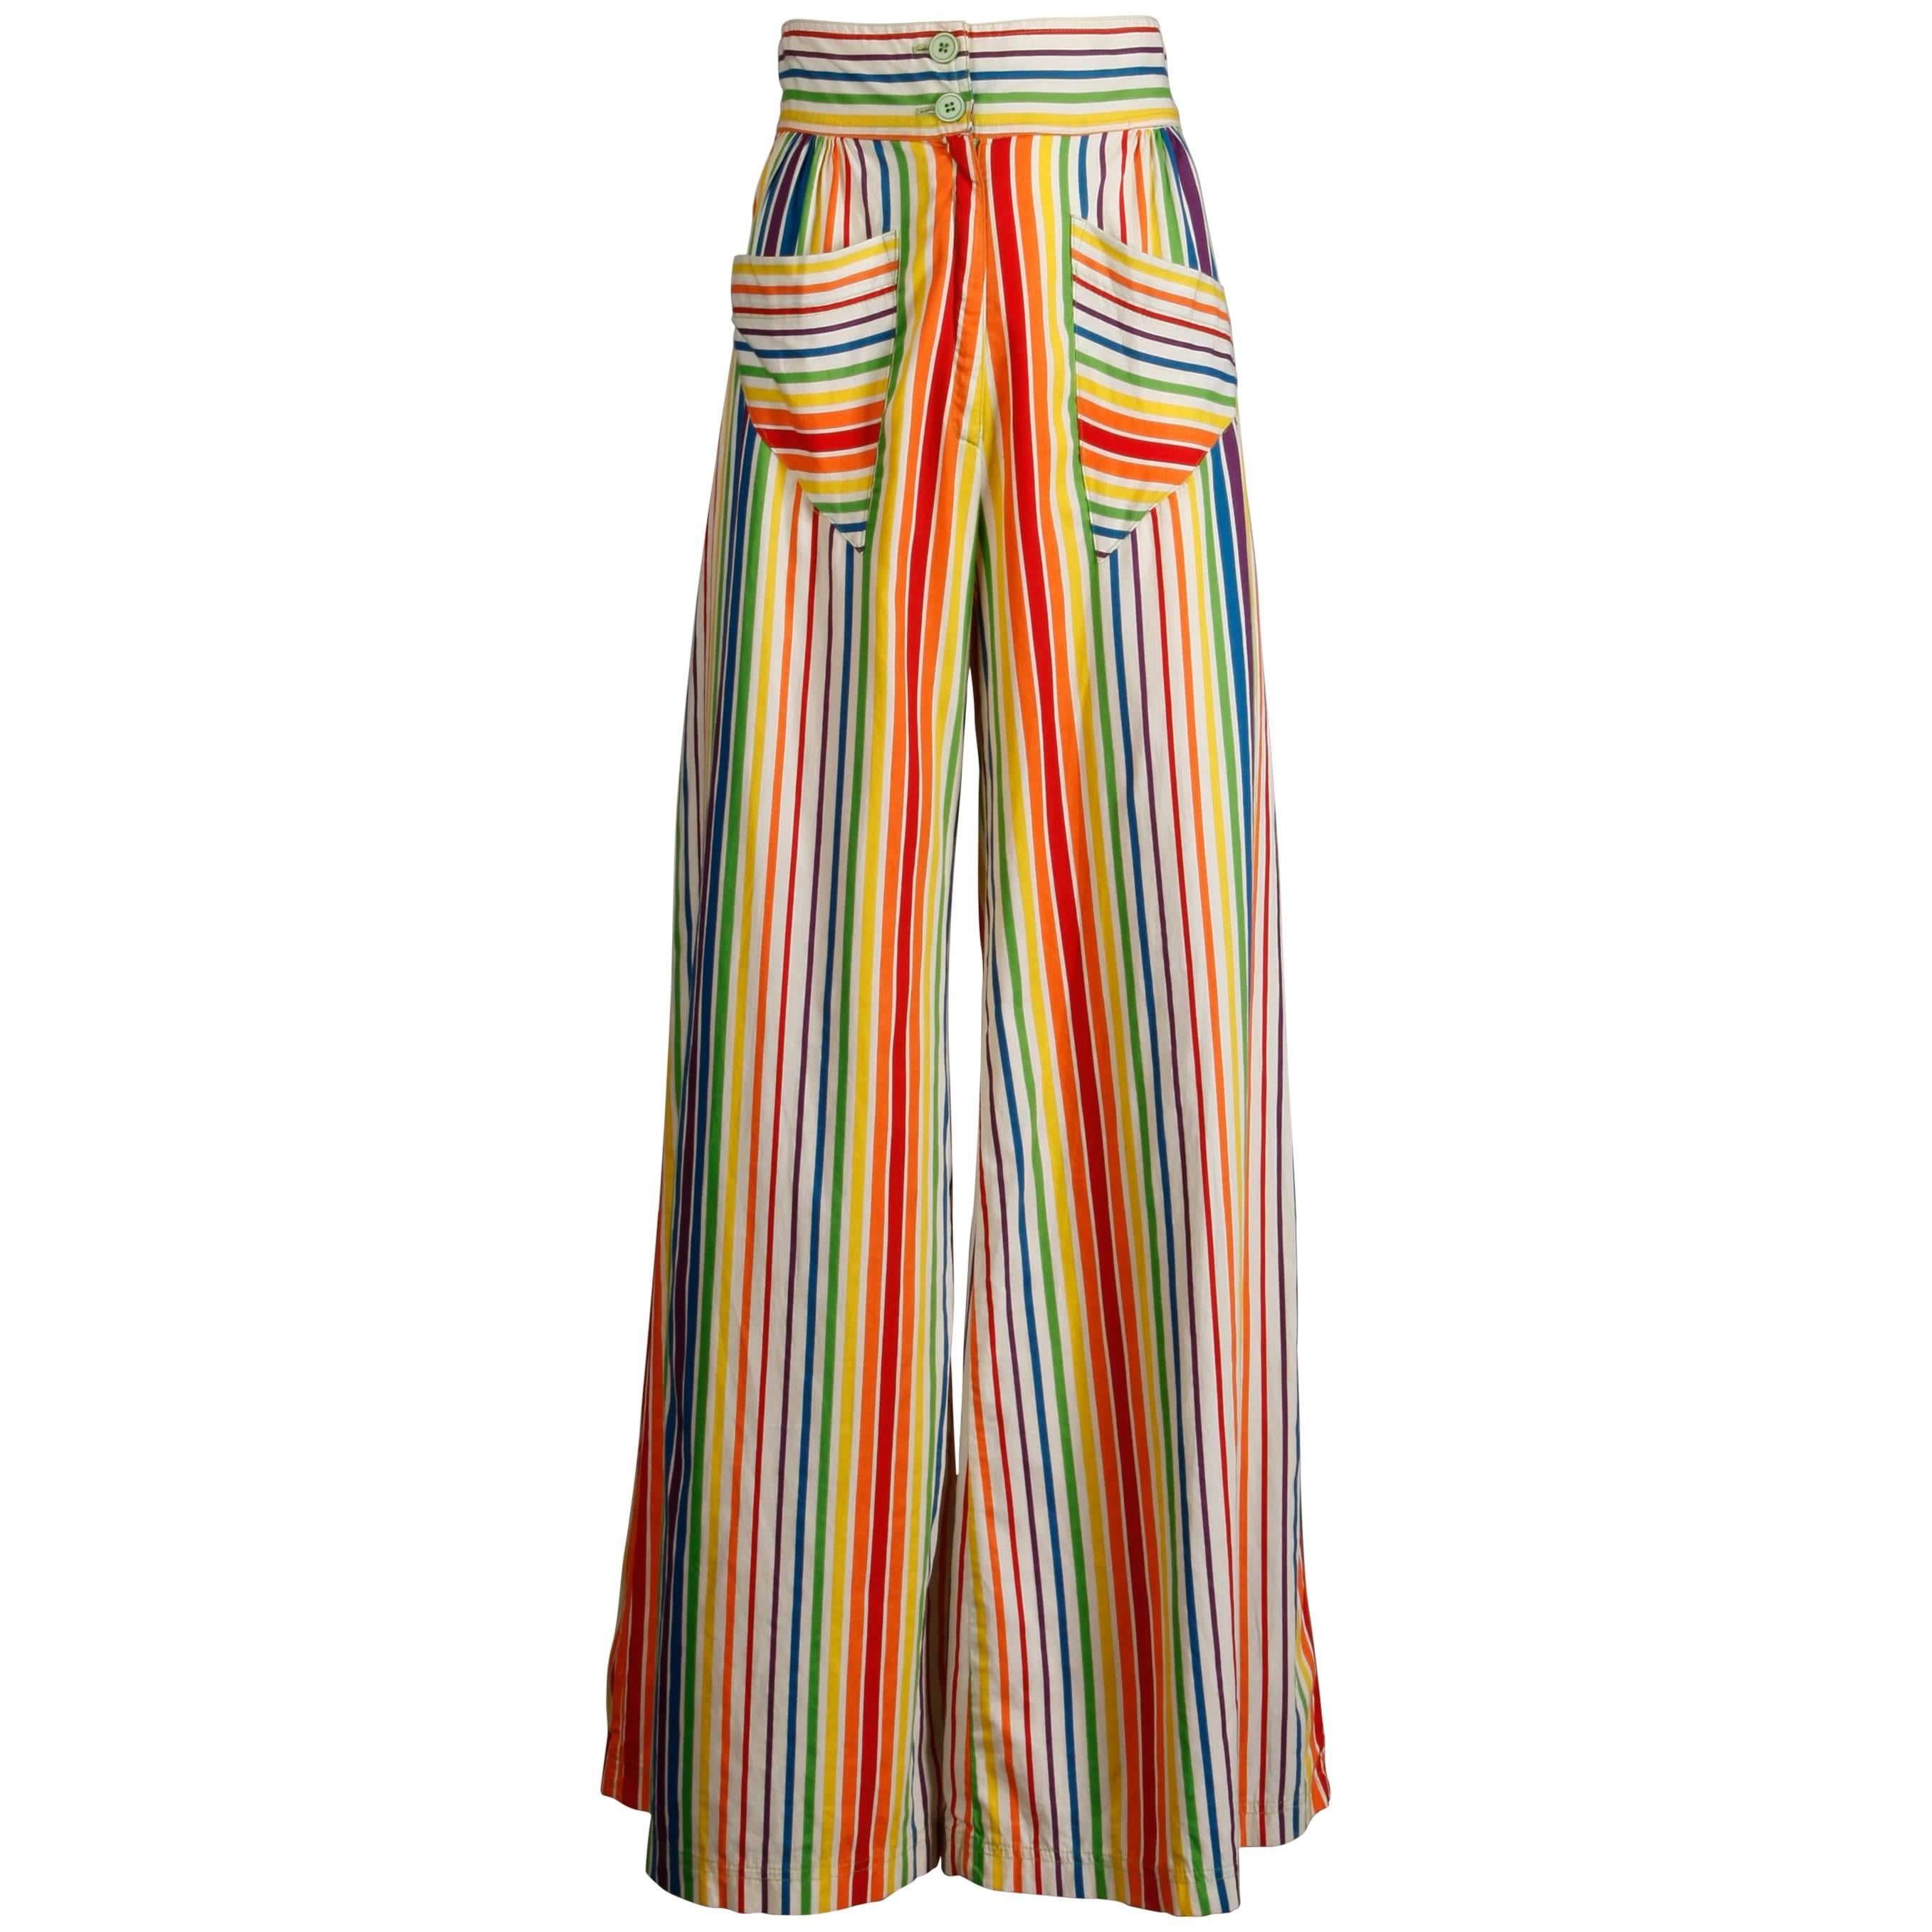 Betsey Johnson for Alley Cat Vintage Rainbow Striped Palazzo Pants, 1970s For Sale